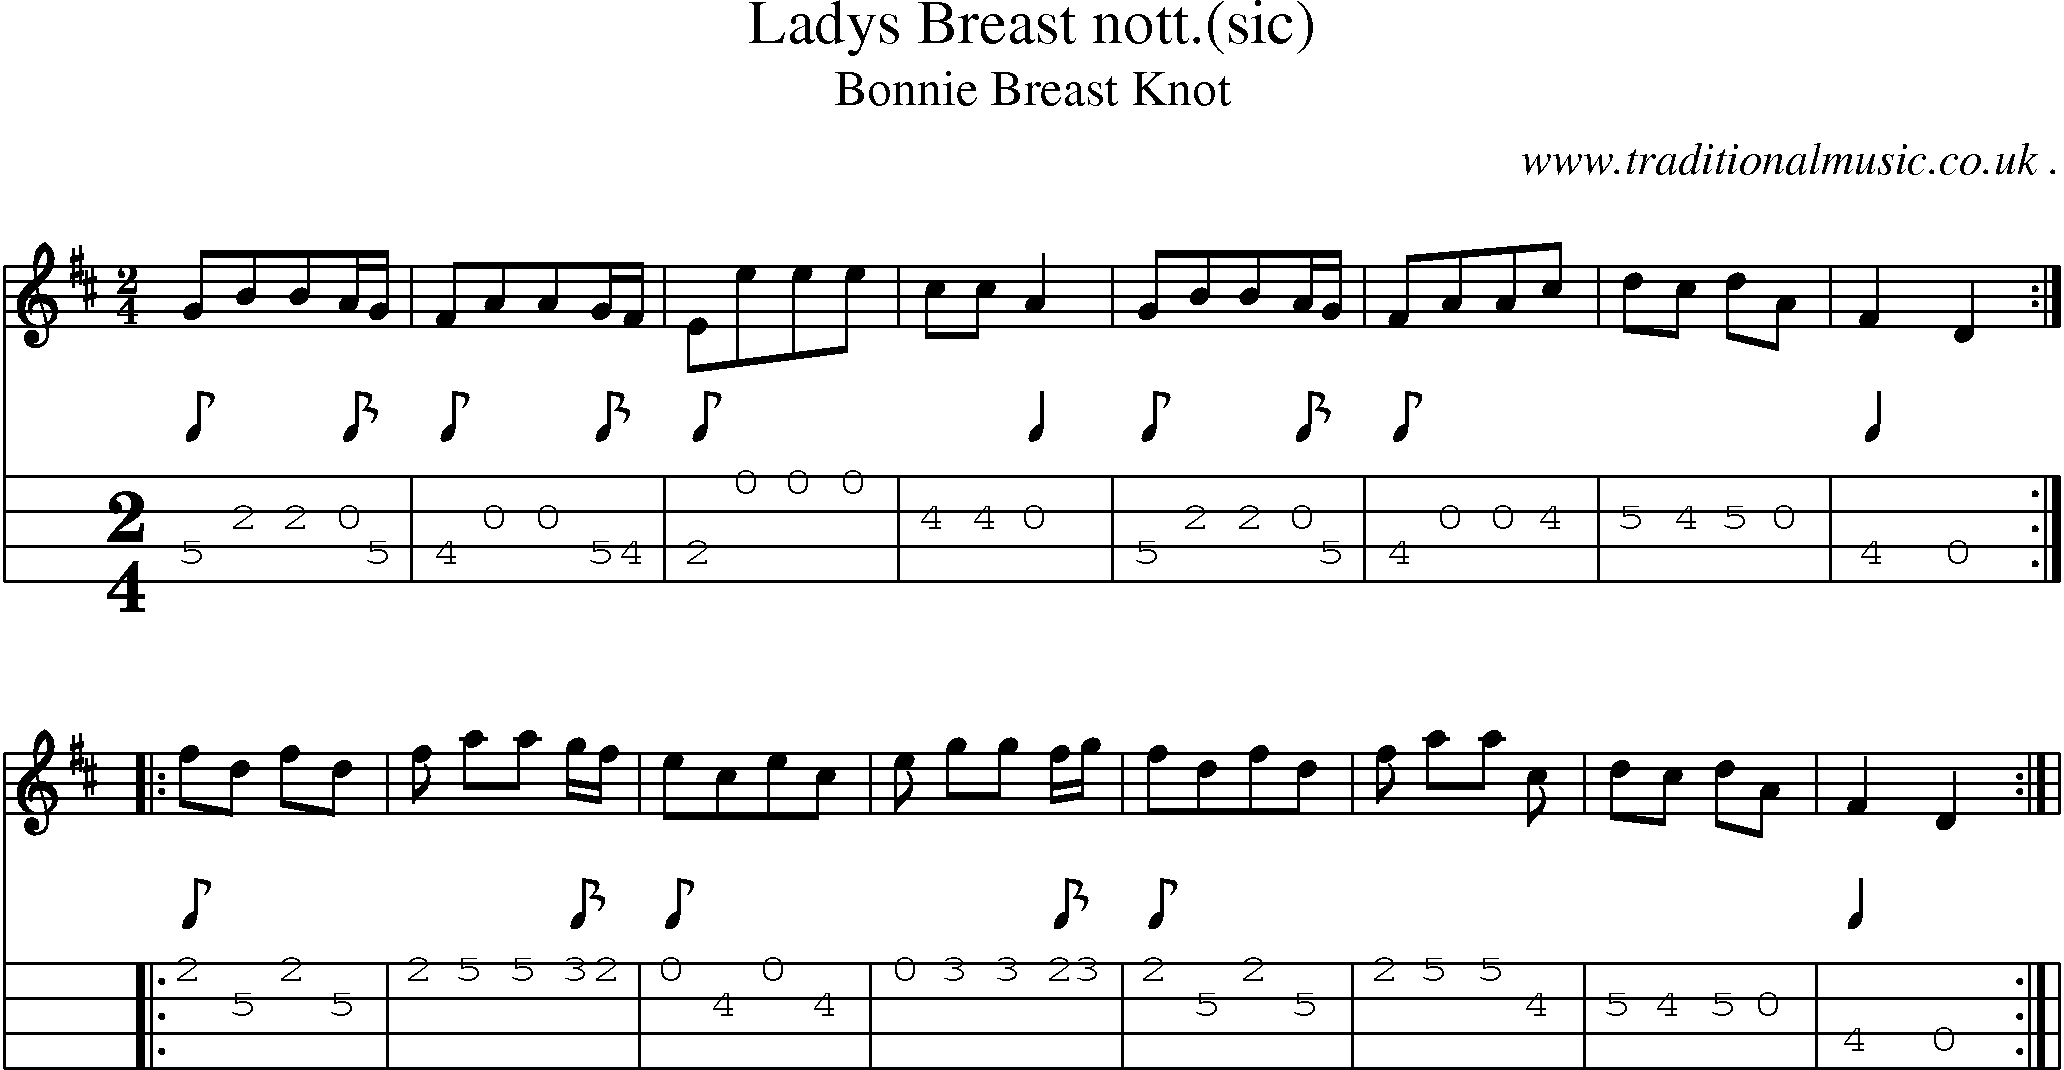 Sheet-Music and Mandolin Tabs for Ladys Breast Nott(sic)